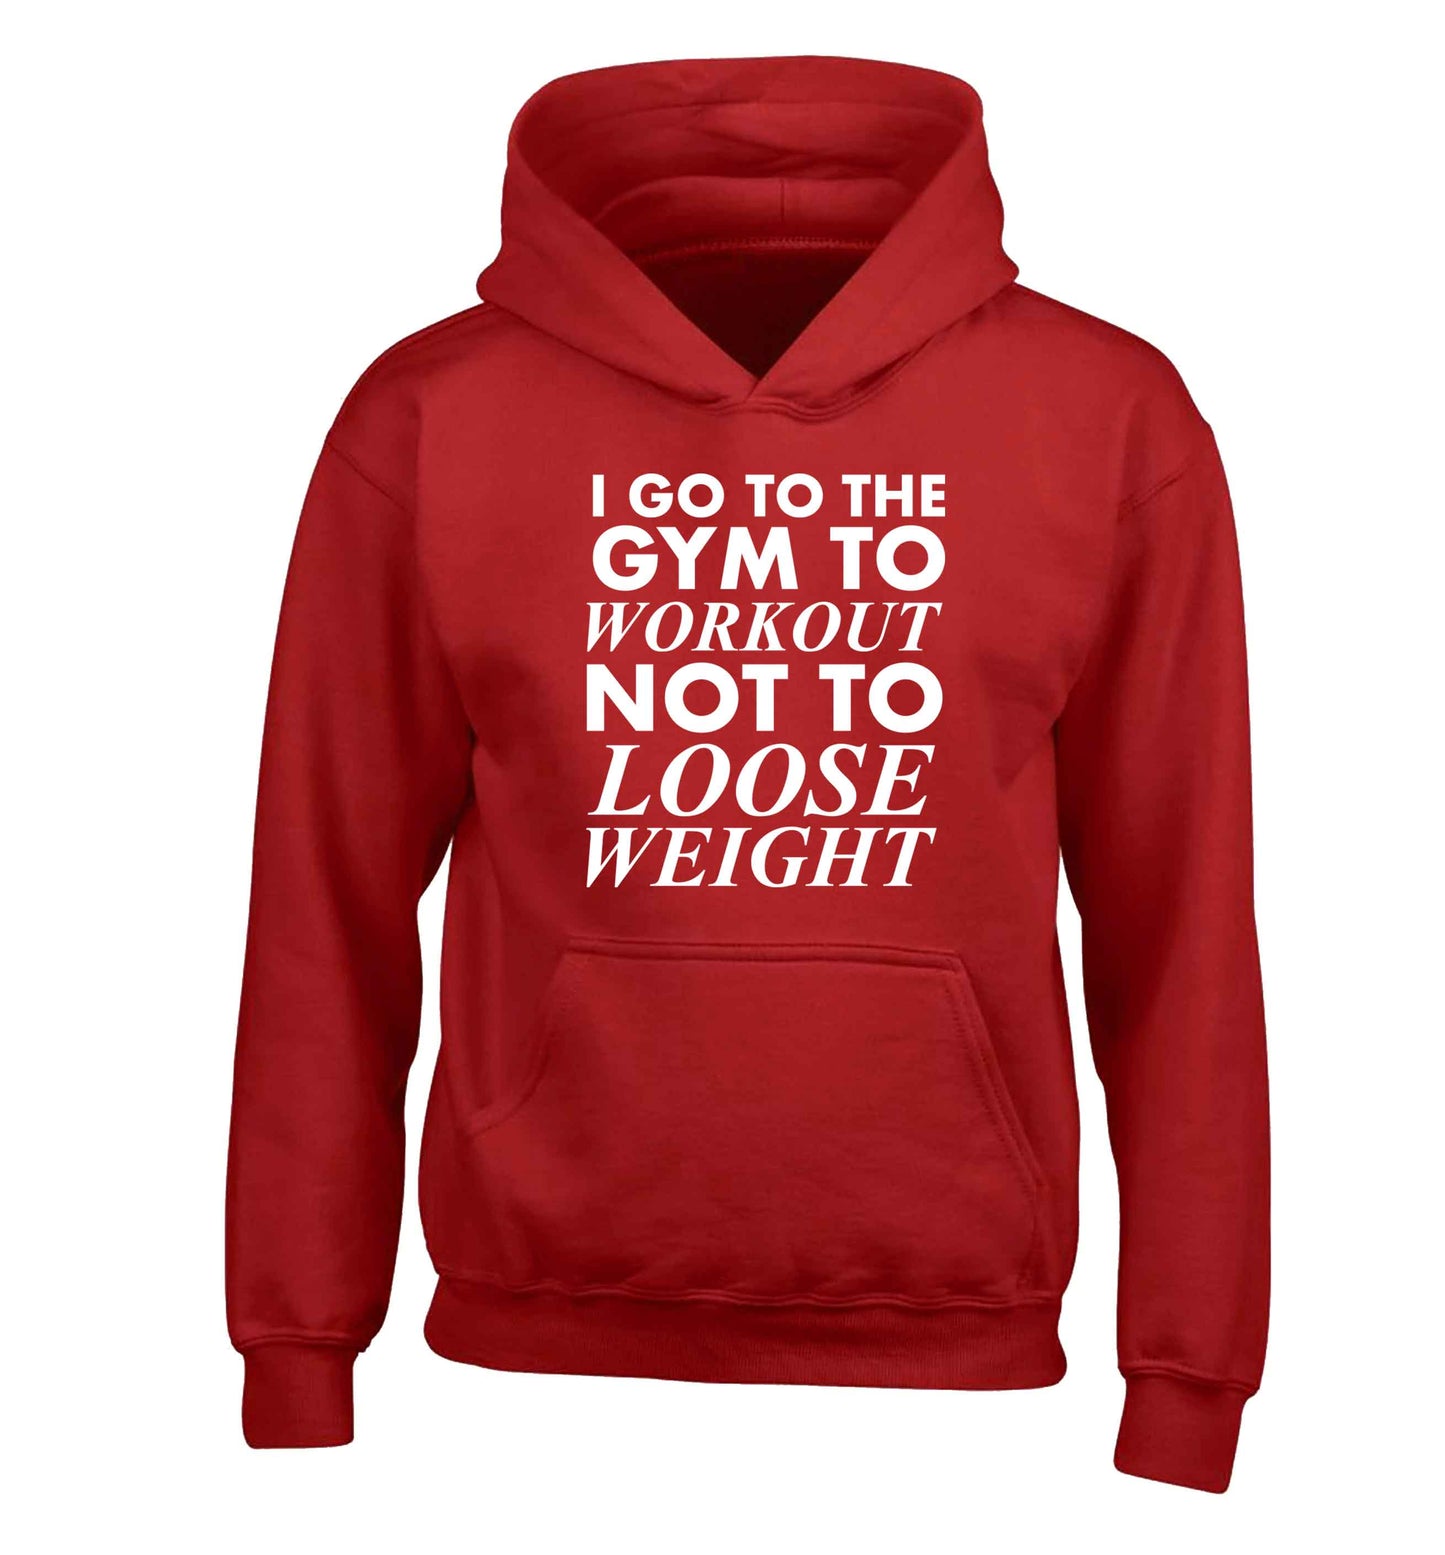 I go to the gym to workout not to loose weight children's red hoodie 12-13 Years